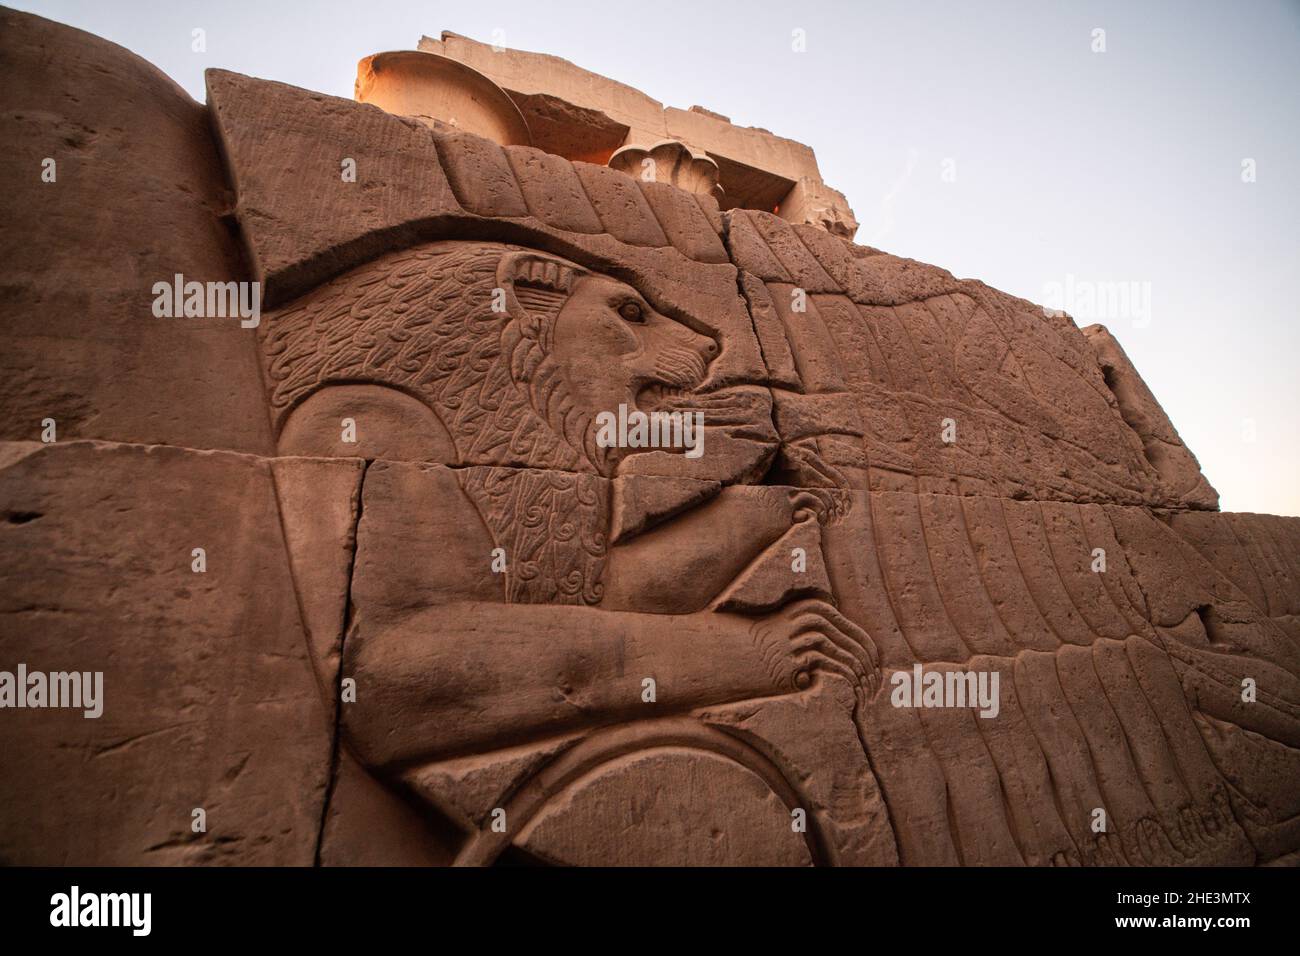 An ancient carving in the ruins of Kom Ombo temple in Egypt depicts a lion biting a hand. Stock Photo